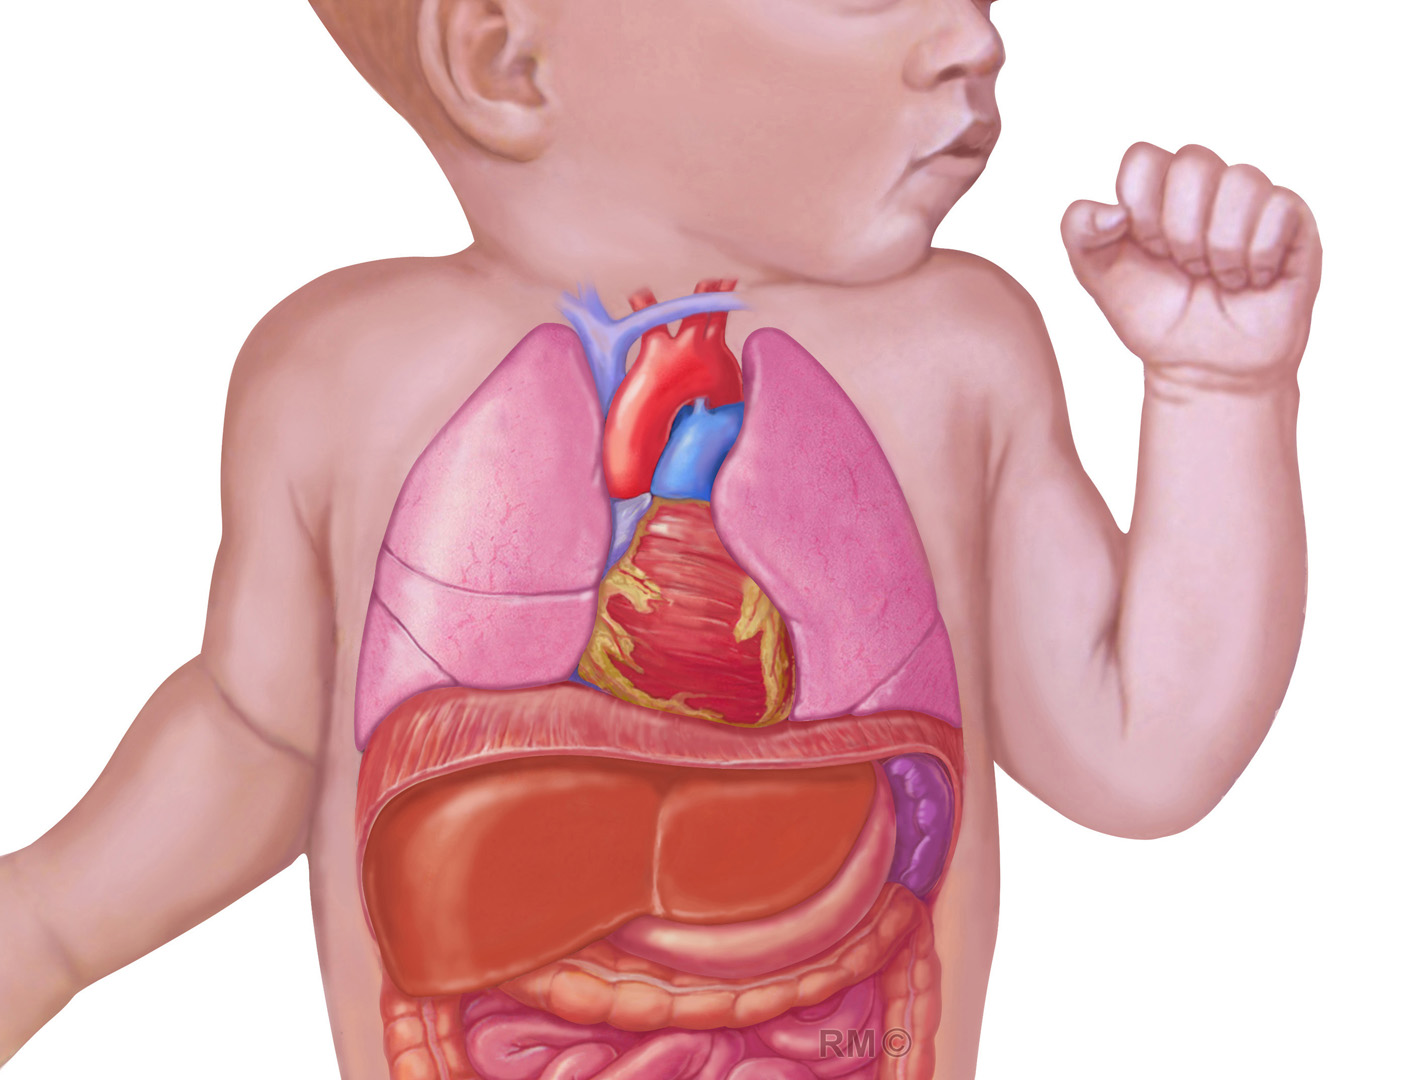 An illustration showing normal development without CDH in a baby